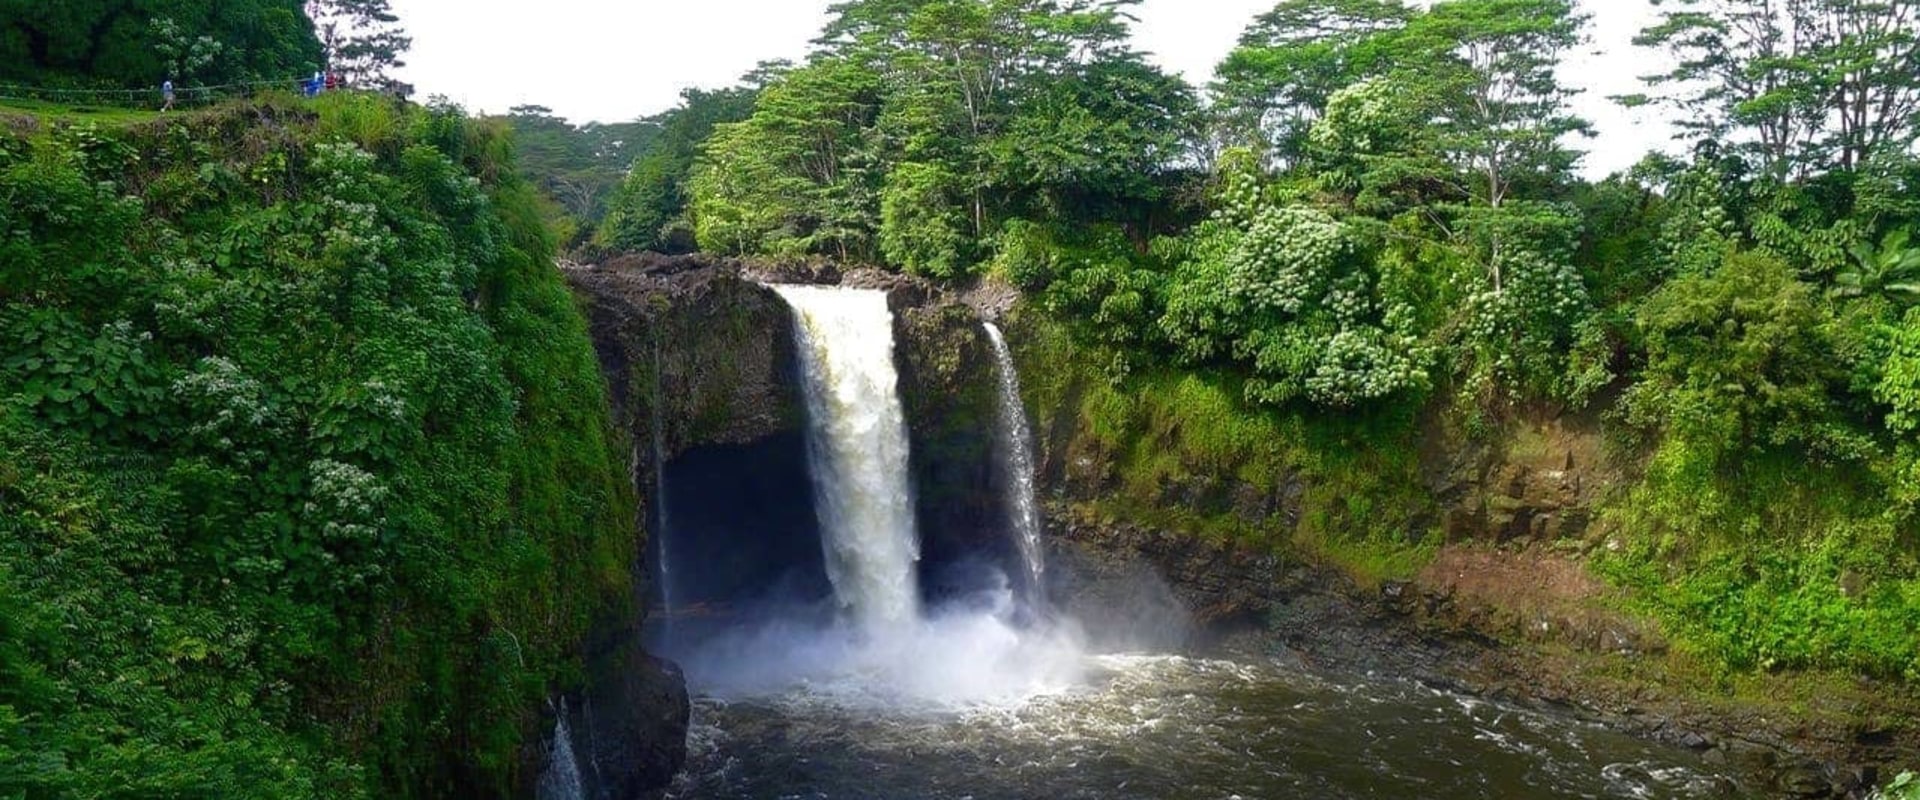 Exploring Big Island On A Budget: Affordable Car Rentals For Outdoor Excursion Tours